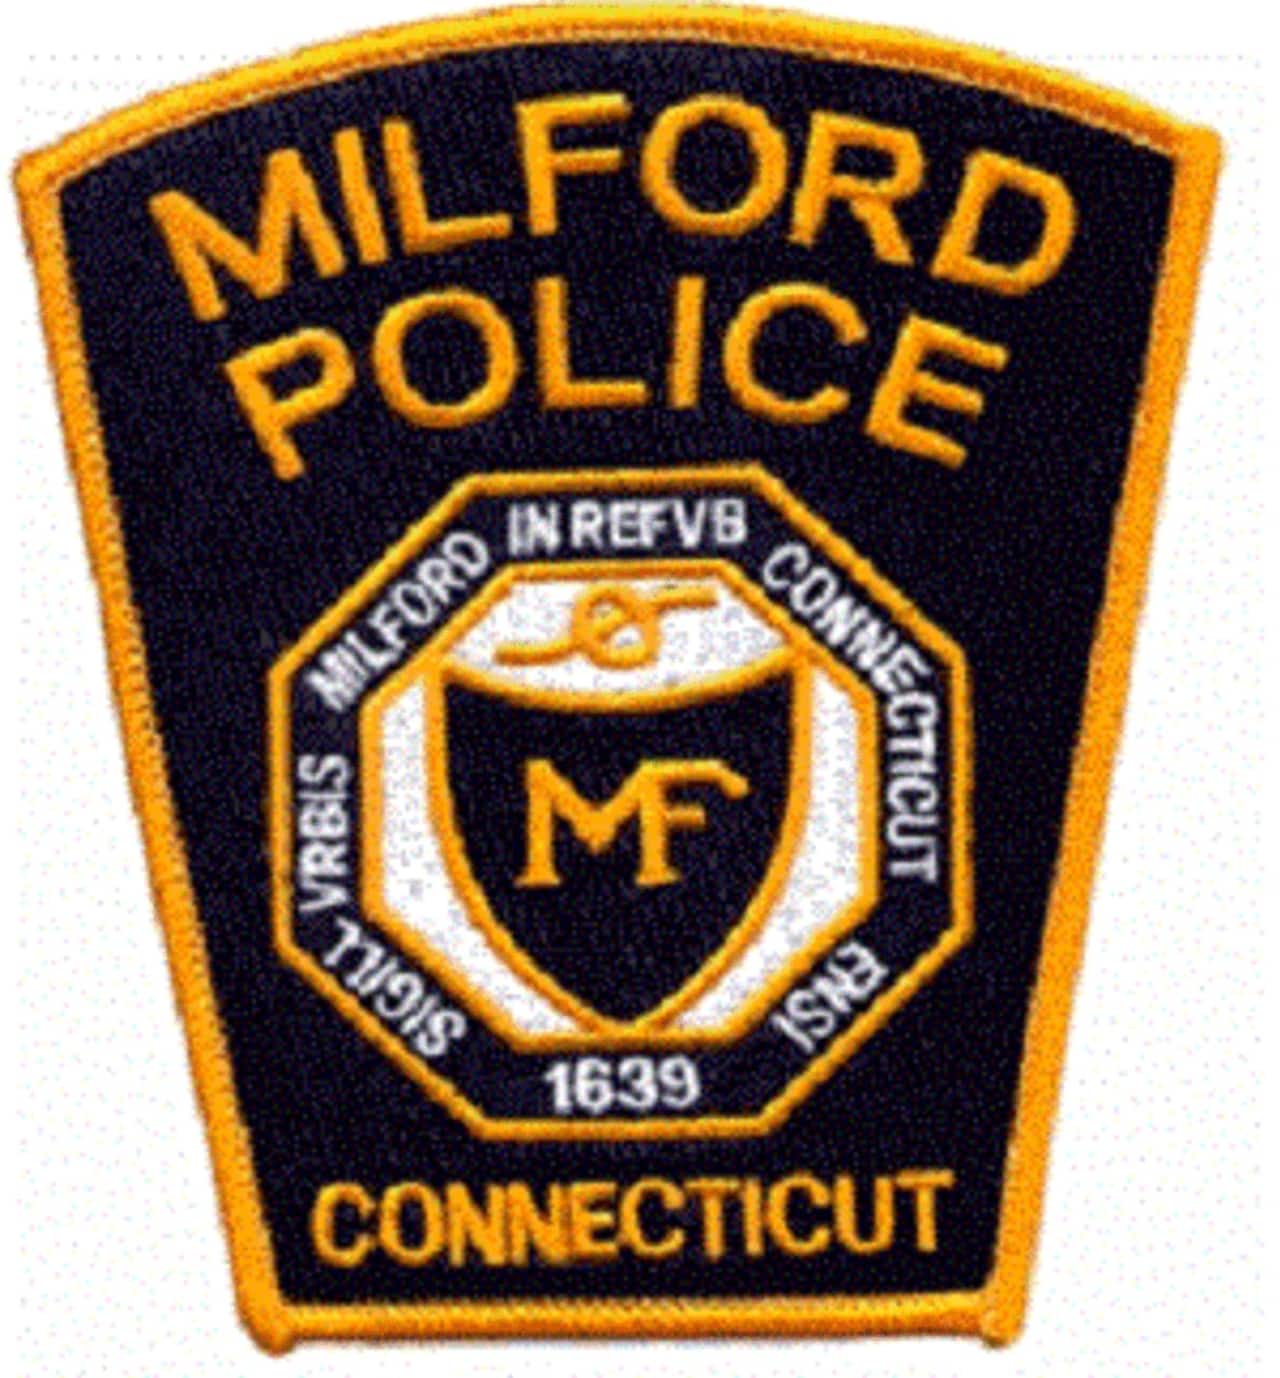 Milford Police arrested an area man following a domestic dispute.